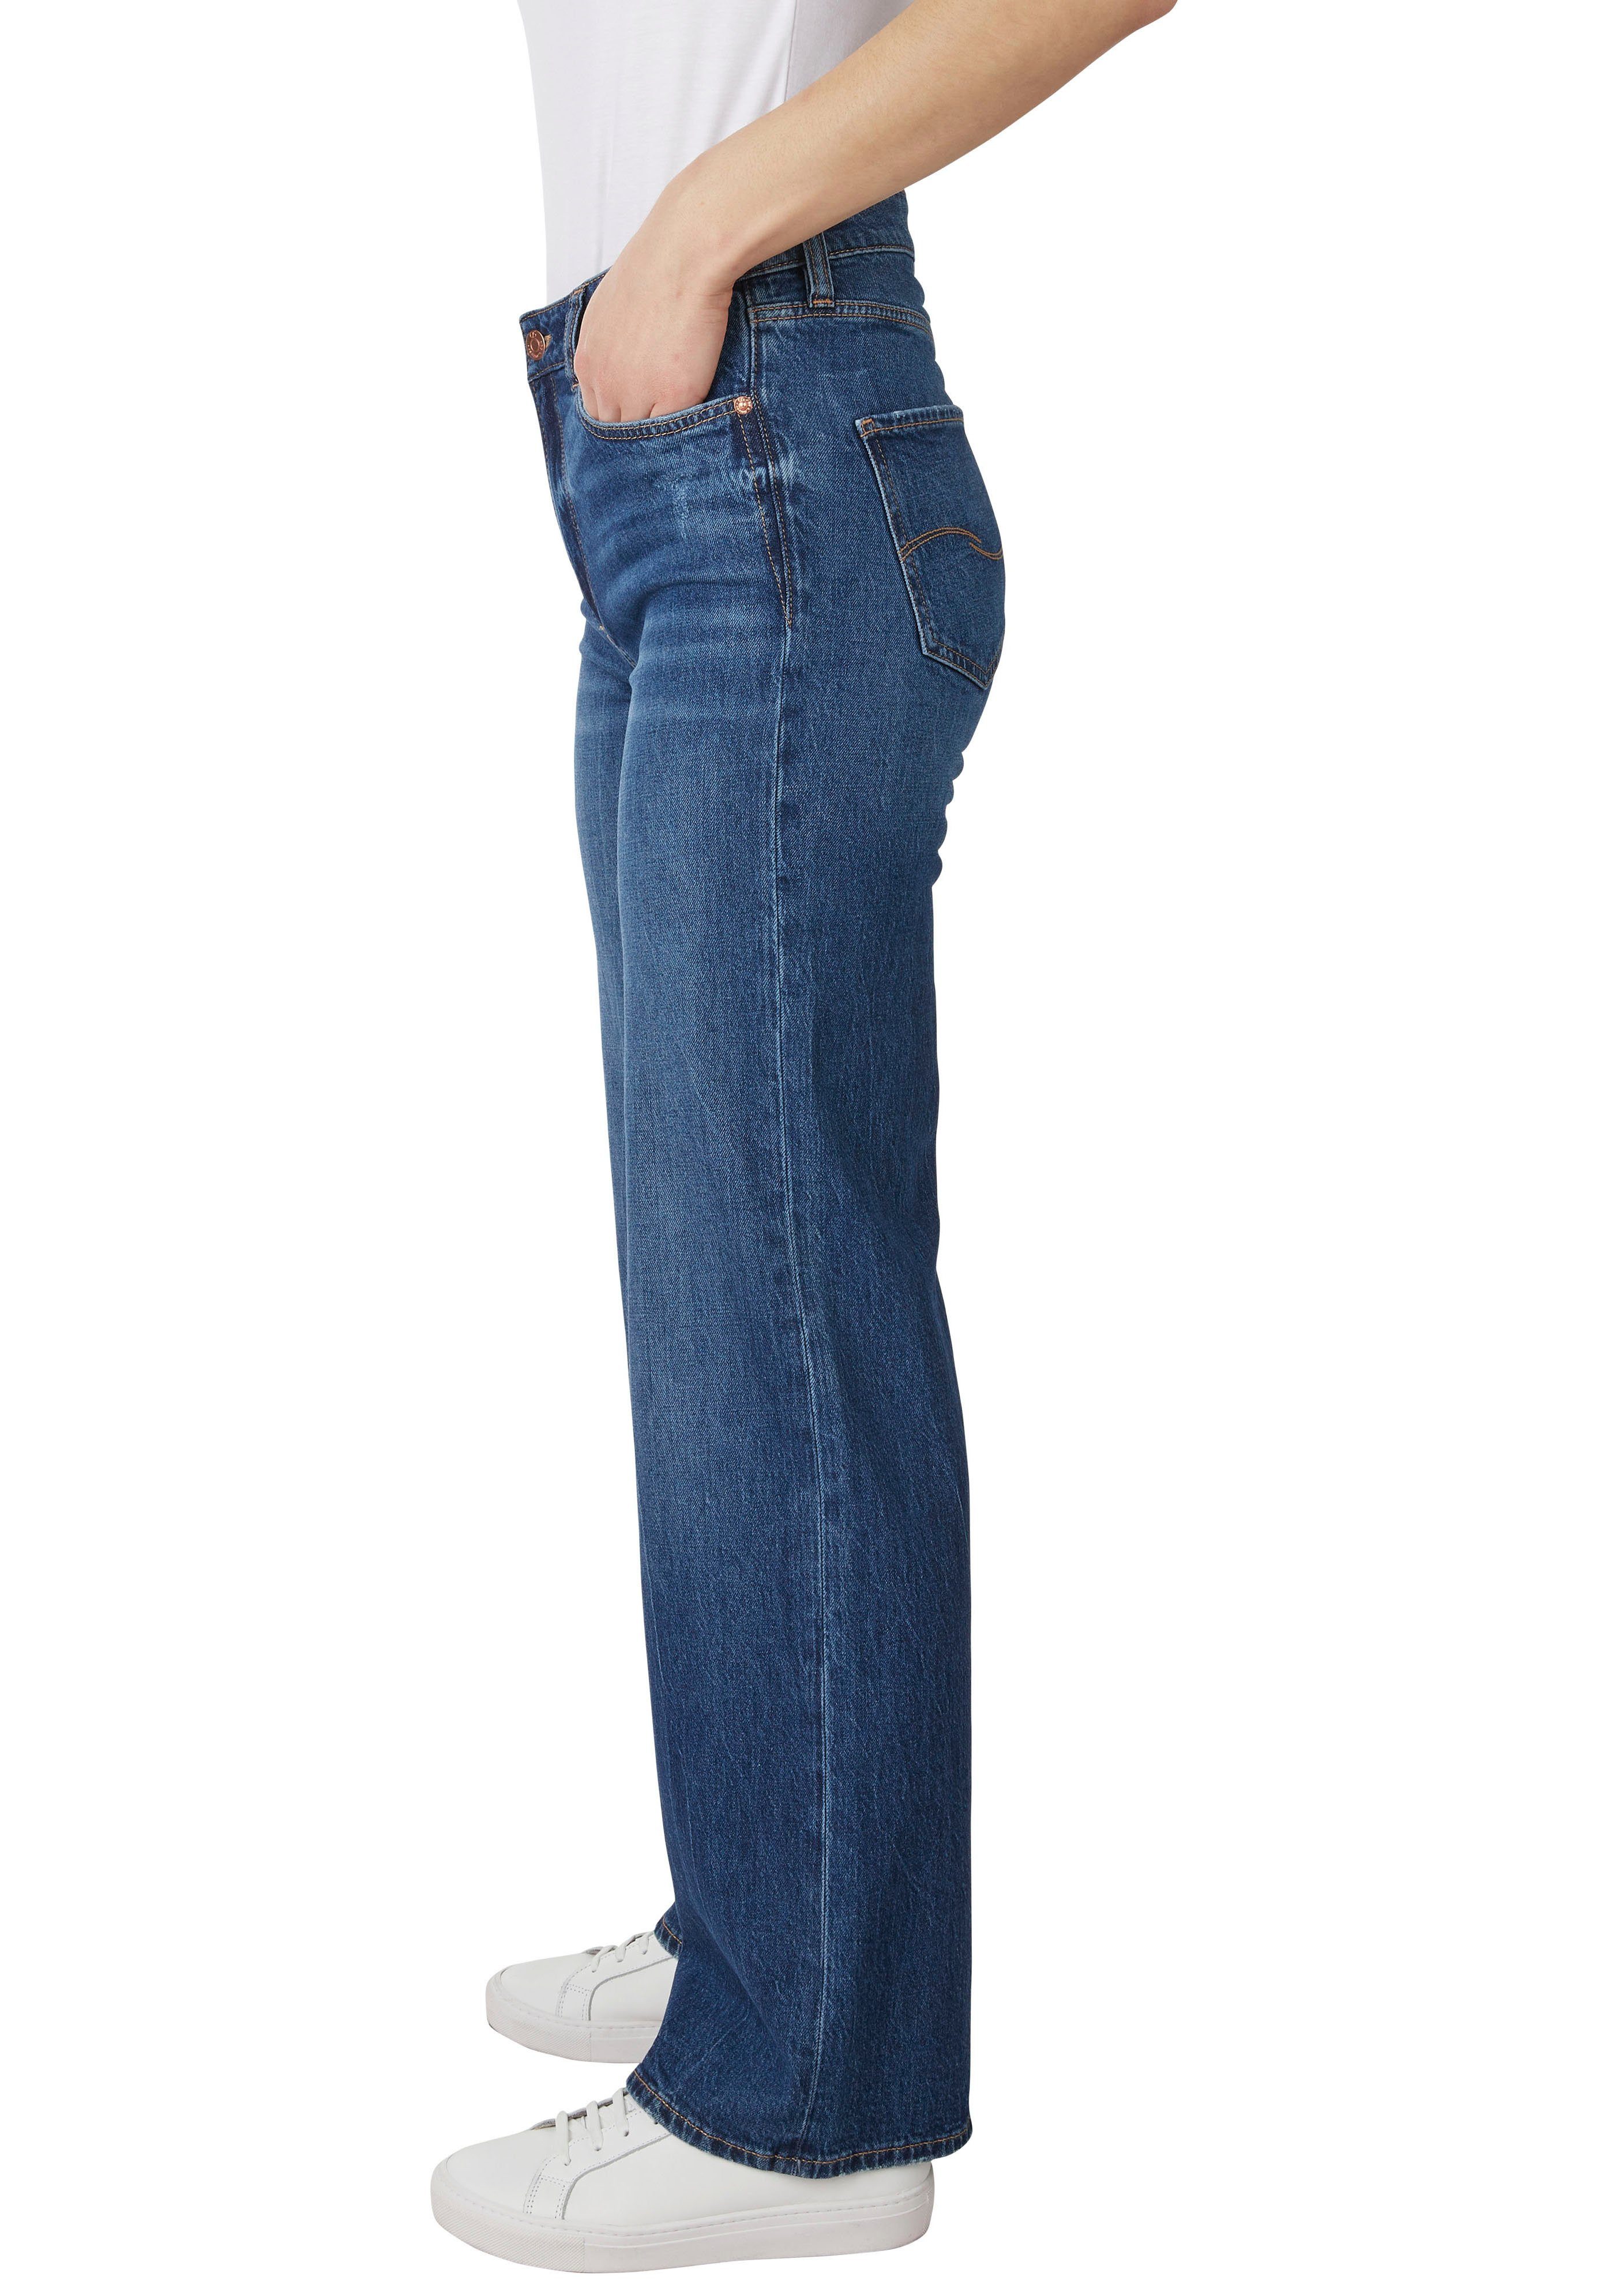 Jeans Catie Weite rise QS high